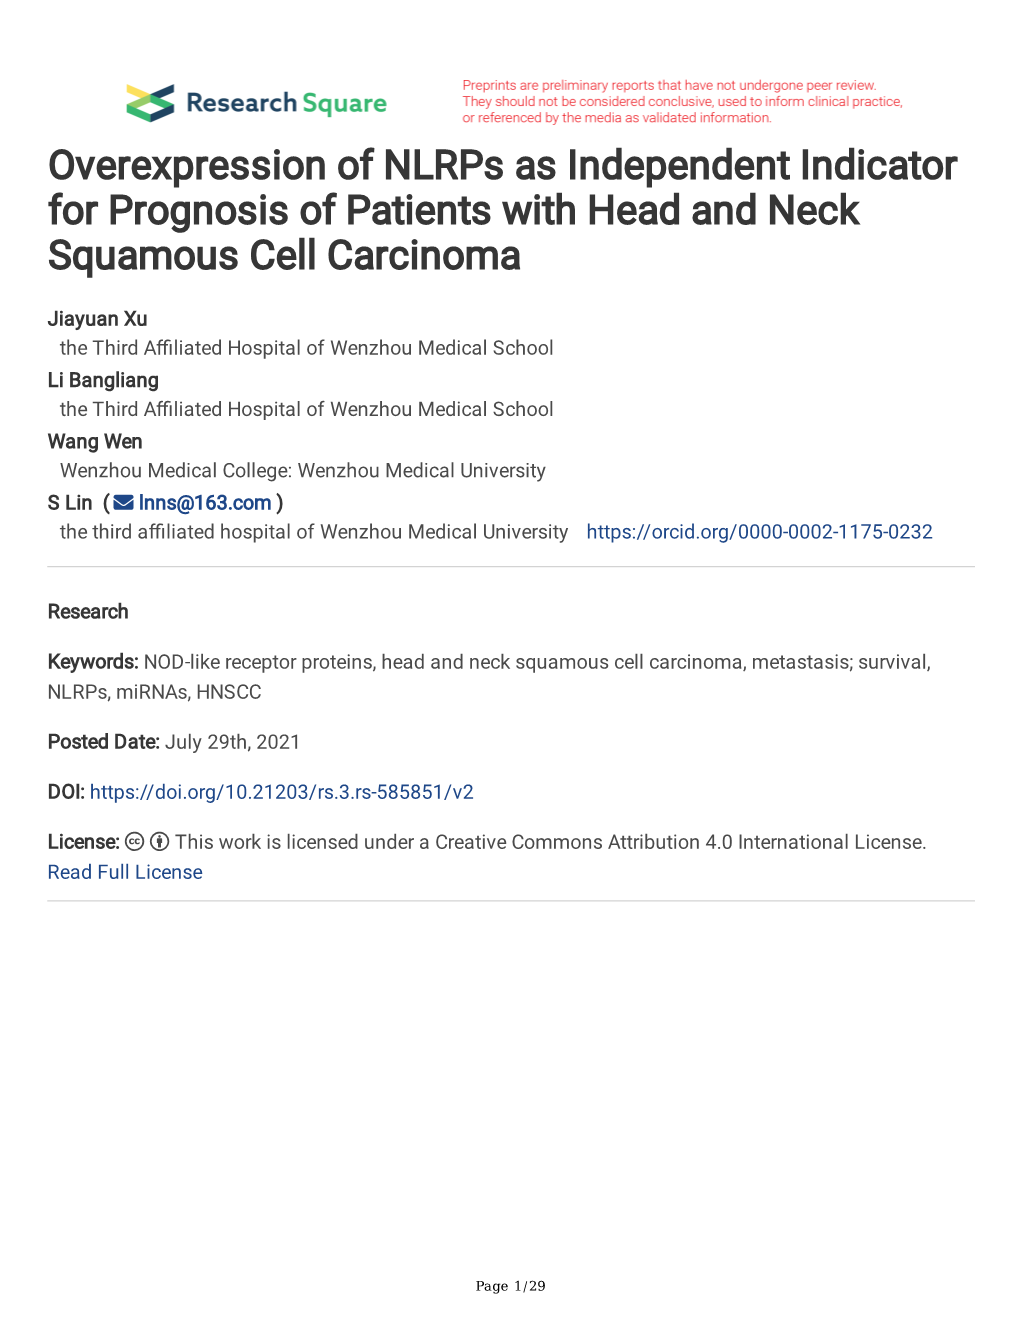 Overexpression of Nlrps As Independent Indicator for Prognosis of Patients with Head and Neck Squamous Cell Carcinoma